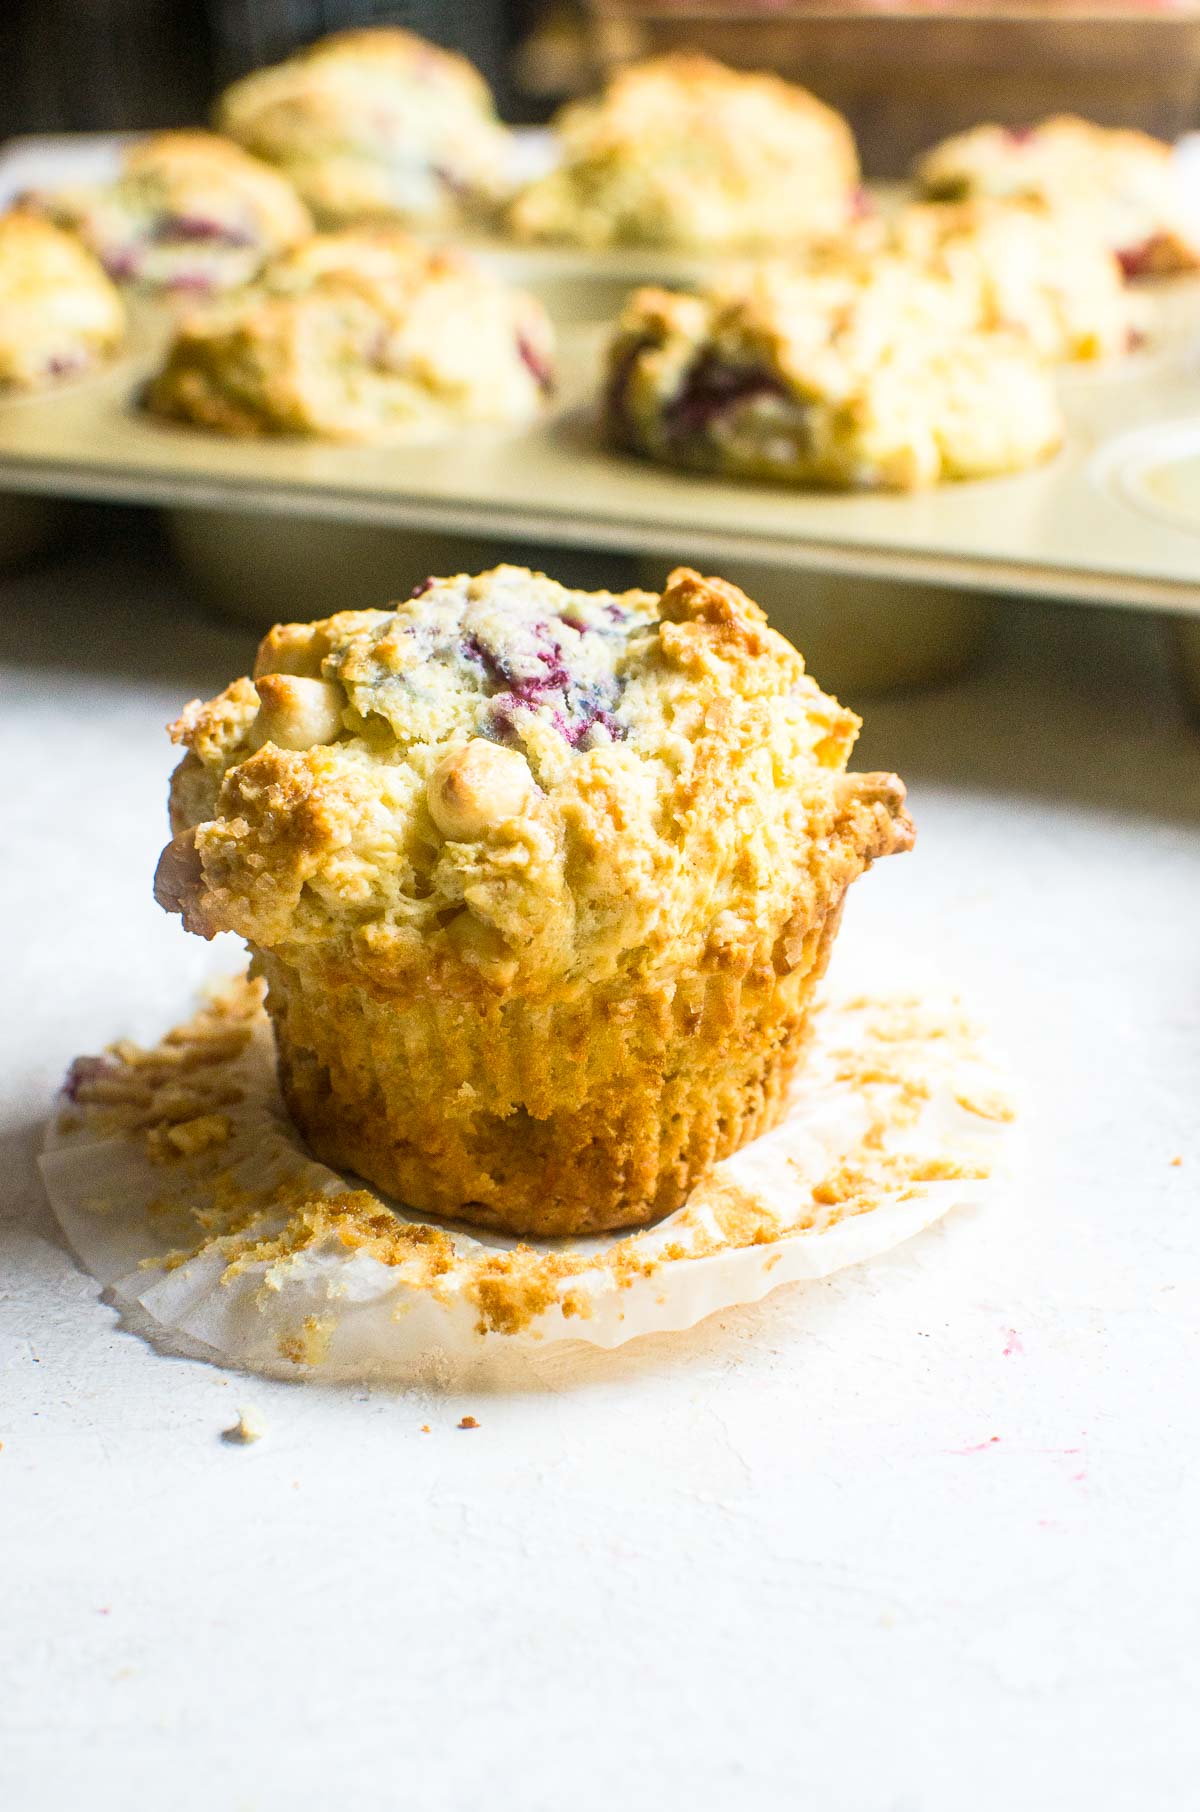 An unwrapped raspberry white chocolate muffin in front of a muffin pan.